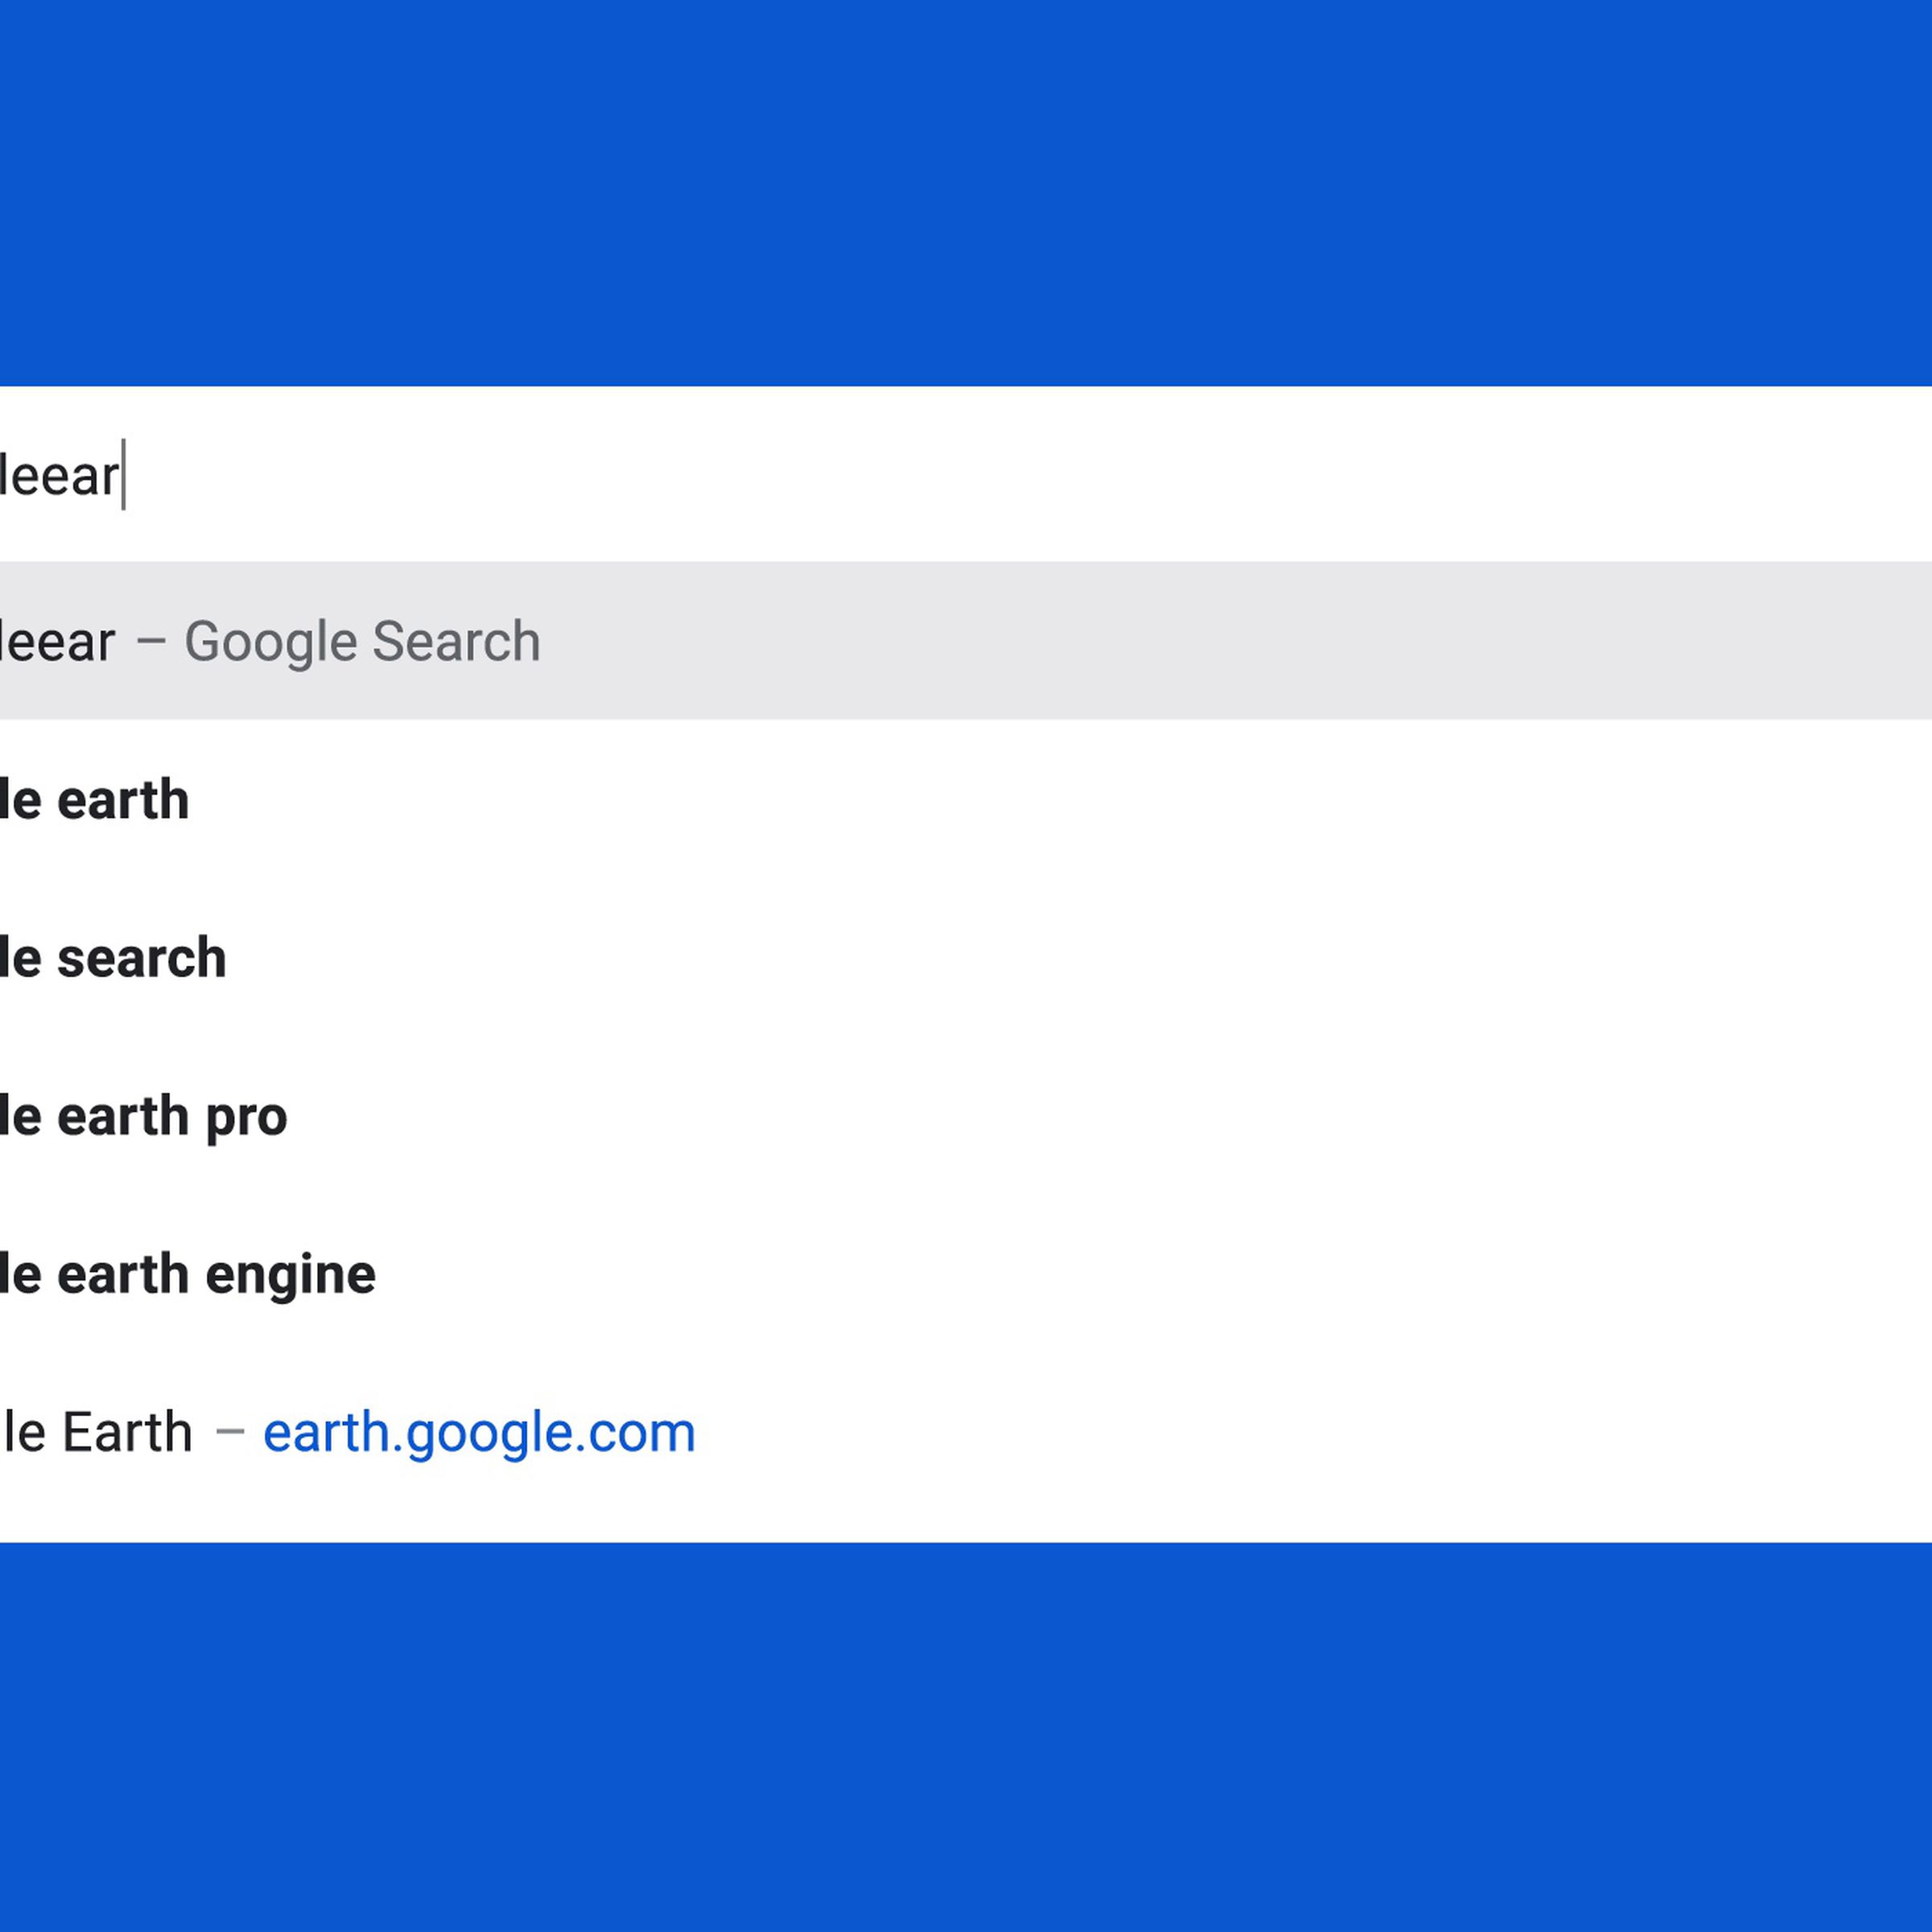 An image of a Google search for “Google Earth” on a blue background.